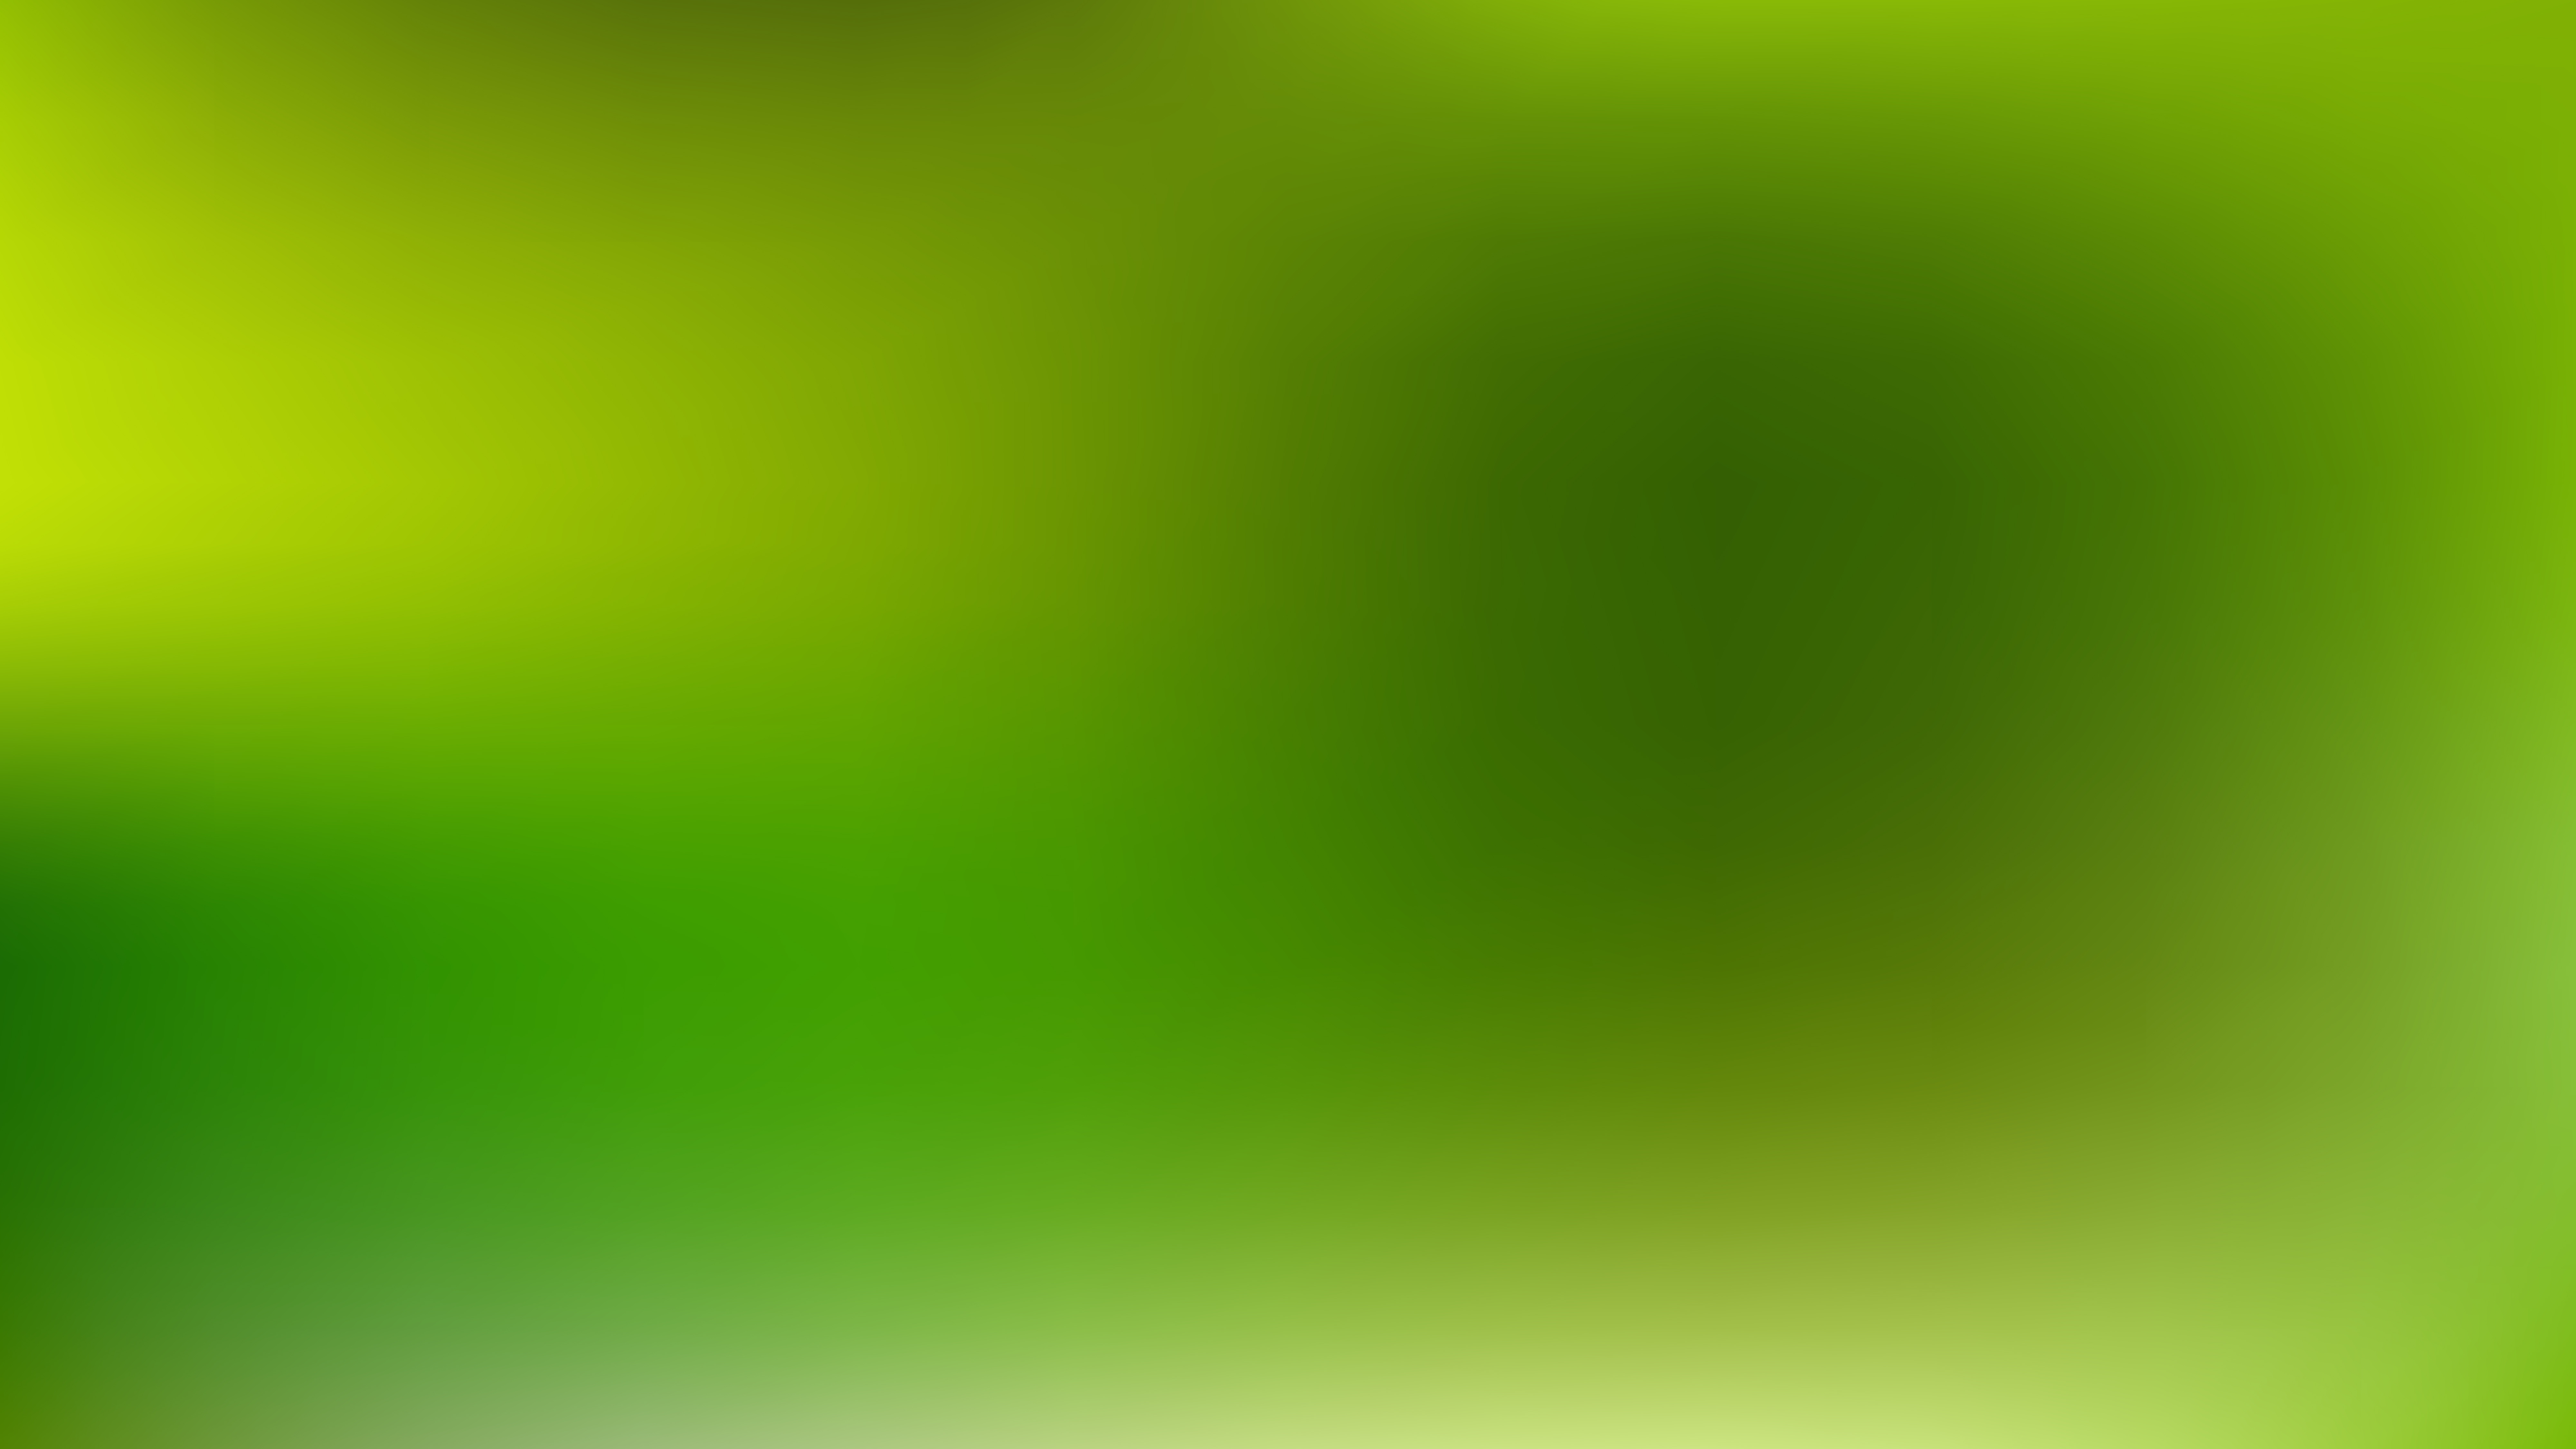 Free Green Blurry Background Vector Image